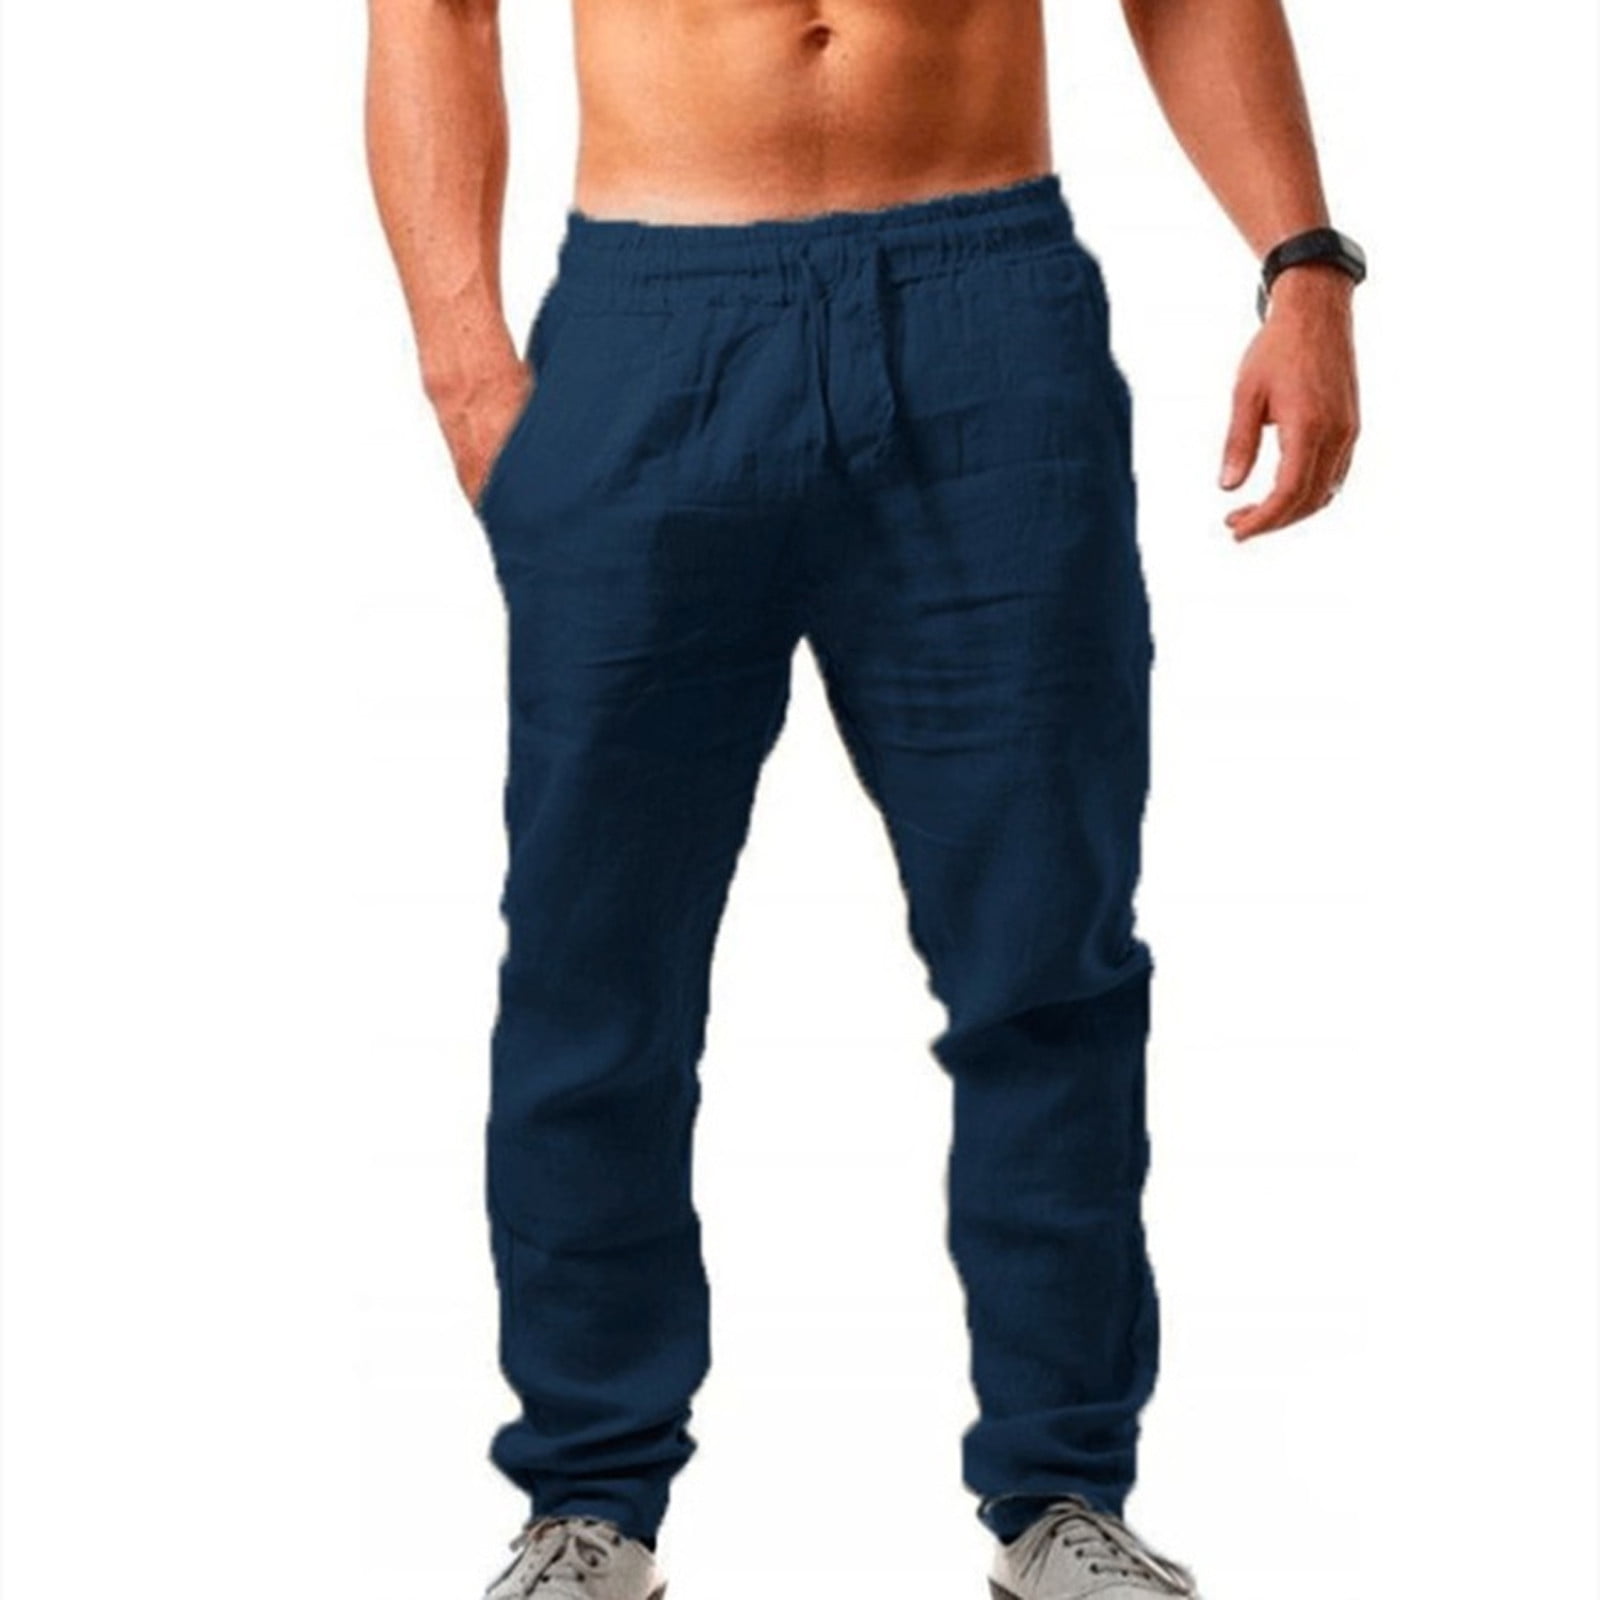 BALEAF Men's Cotton Yoga Sweatpants Open Bottom Joggers Straight Leg  Running Casual Loose Fit Athletic Pants With Pockets Navy Blue XXL 